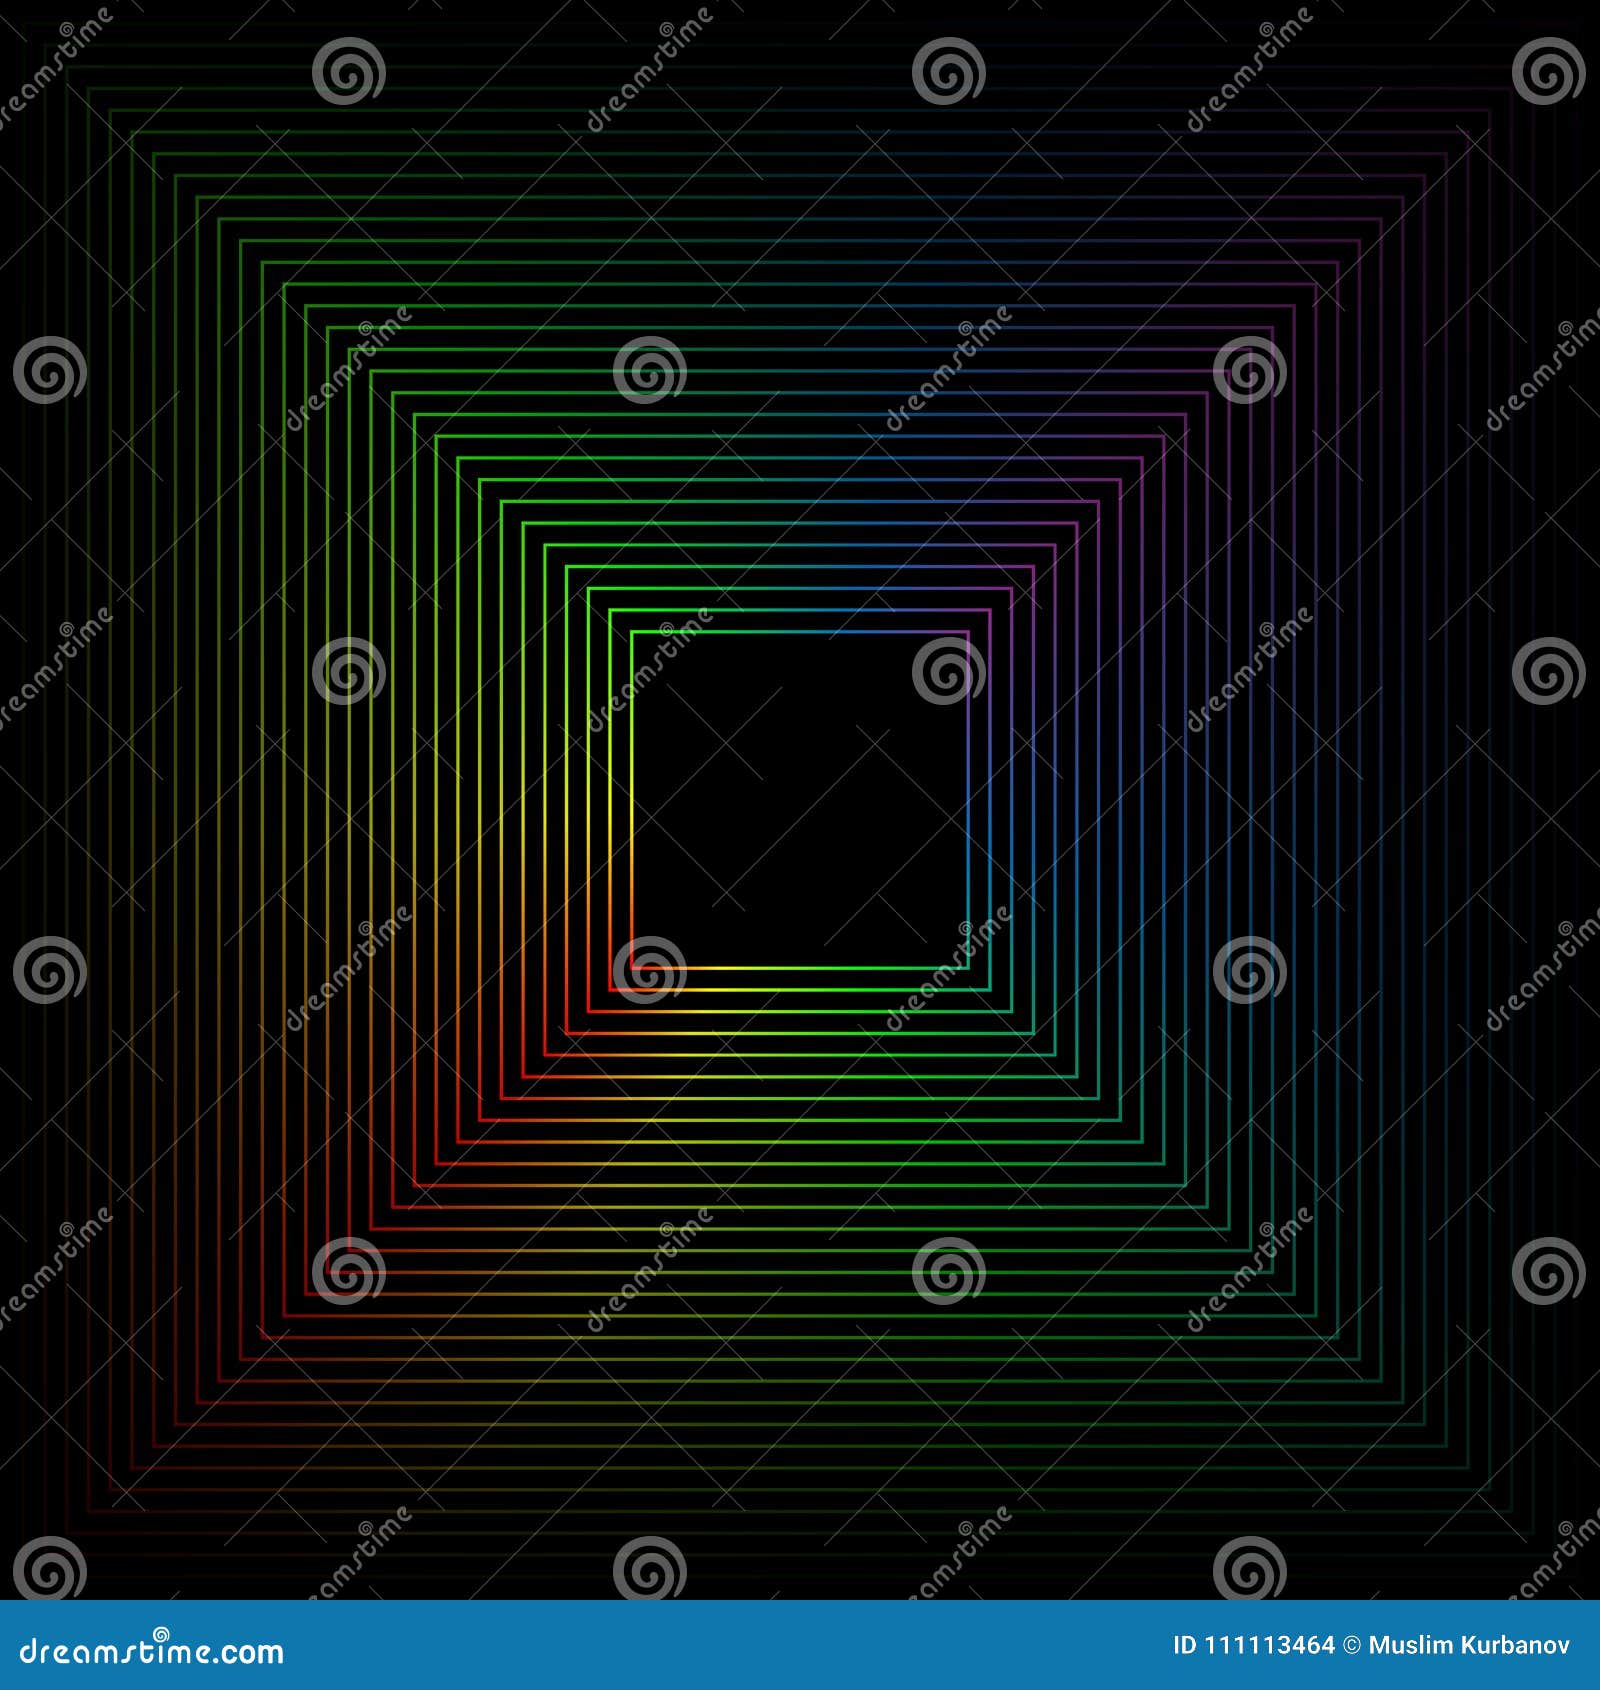 Abstract Multicolored Square Lines on a Black Background. Vector Stock ...